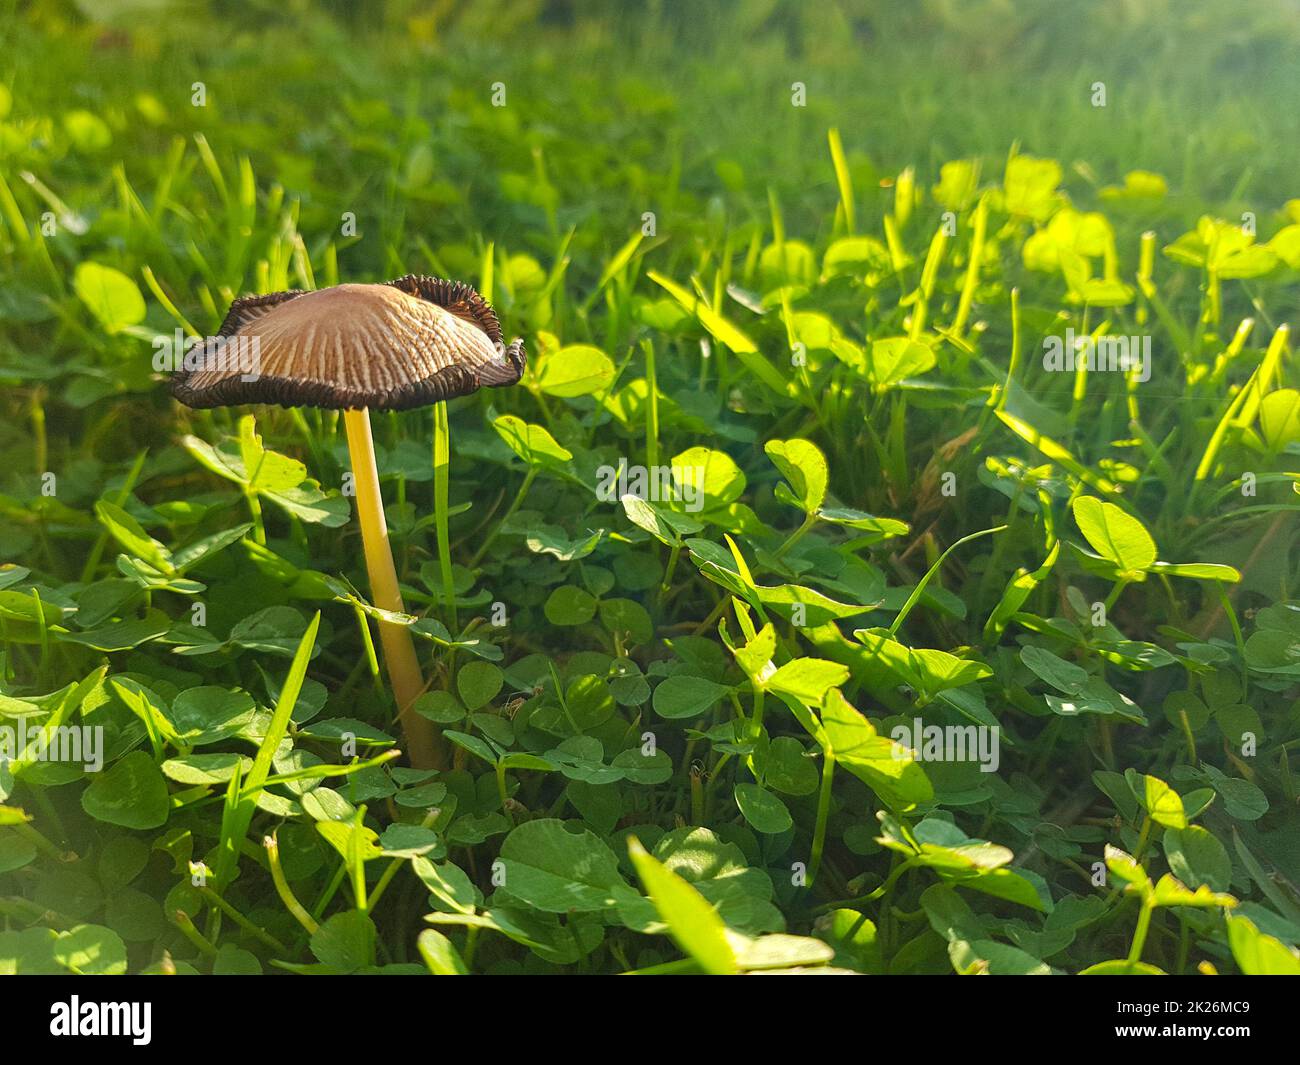 A small mushroom and a green grass Stock Photo